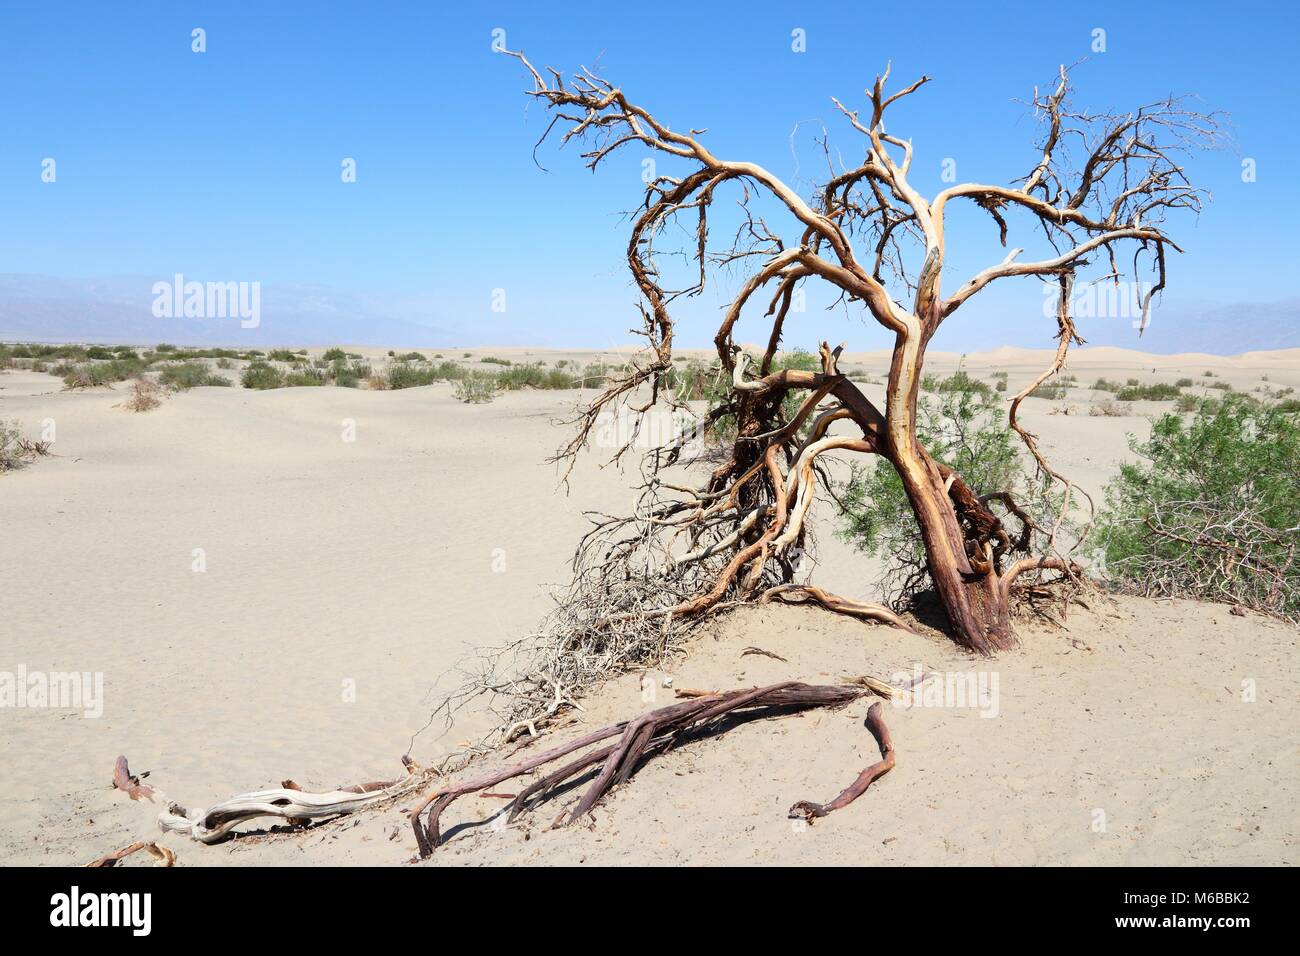 Mojave Desert in California, United States. Death Valley National Park (Inyo County) - sandy desert with dead tree. Stock Photo